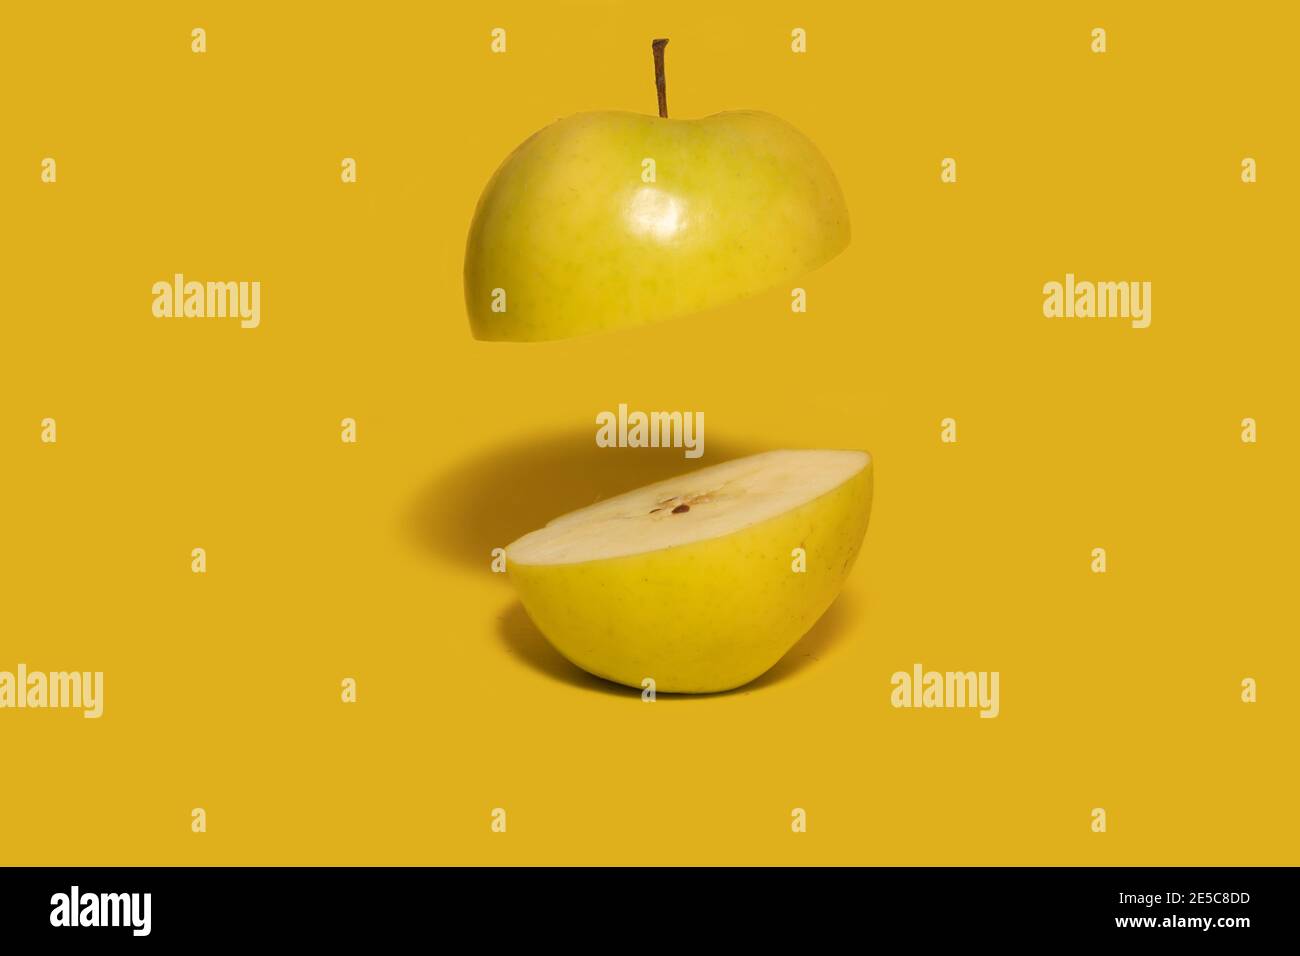 Green apple sliced in half with one half floating in air. Dark yellow background. Creative fruit concept Stock Photo